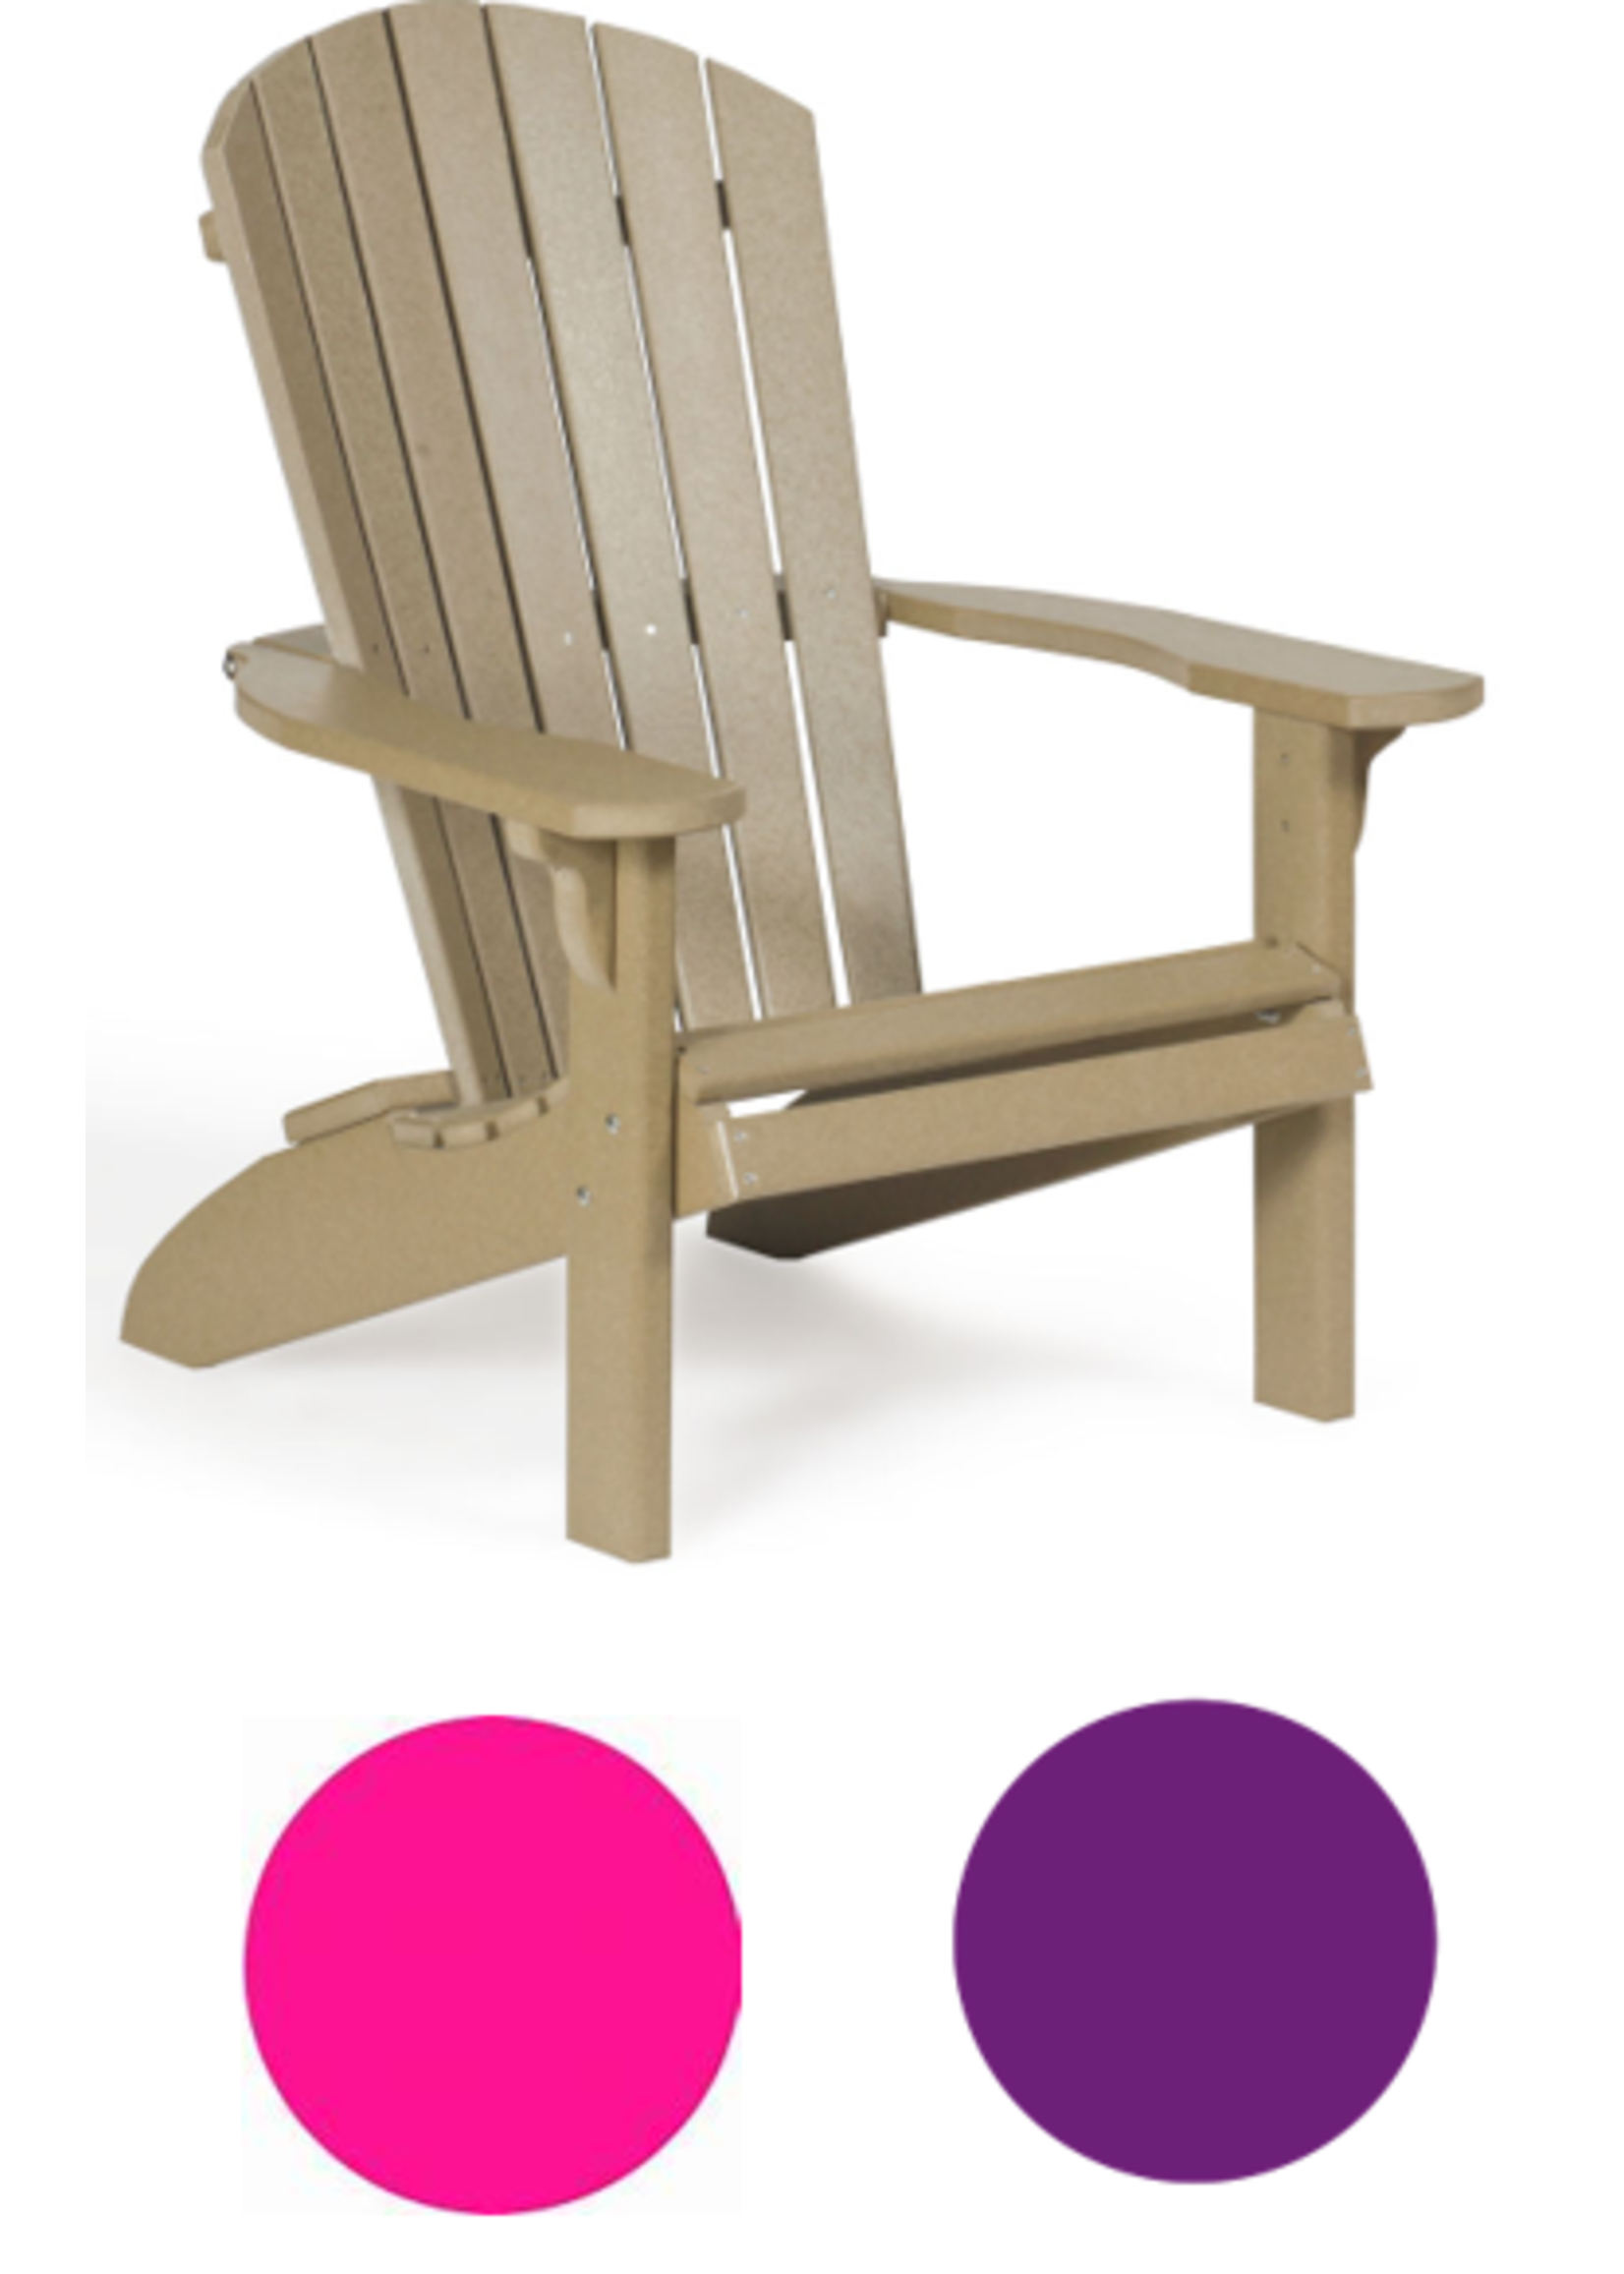 Leisure Lawns 360 * Adirondack Chair in hard to get colours